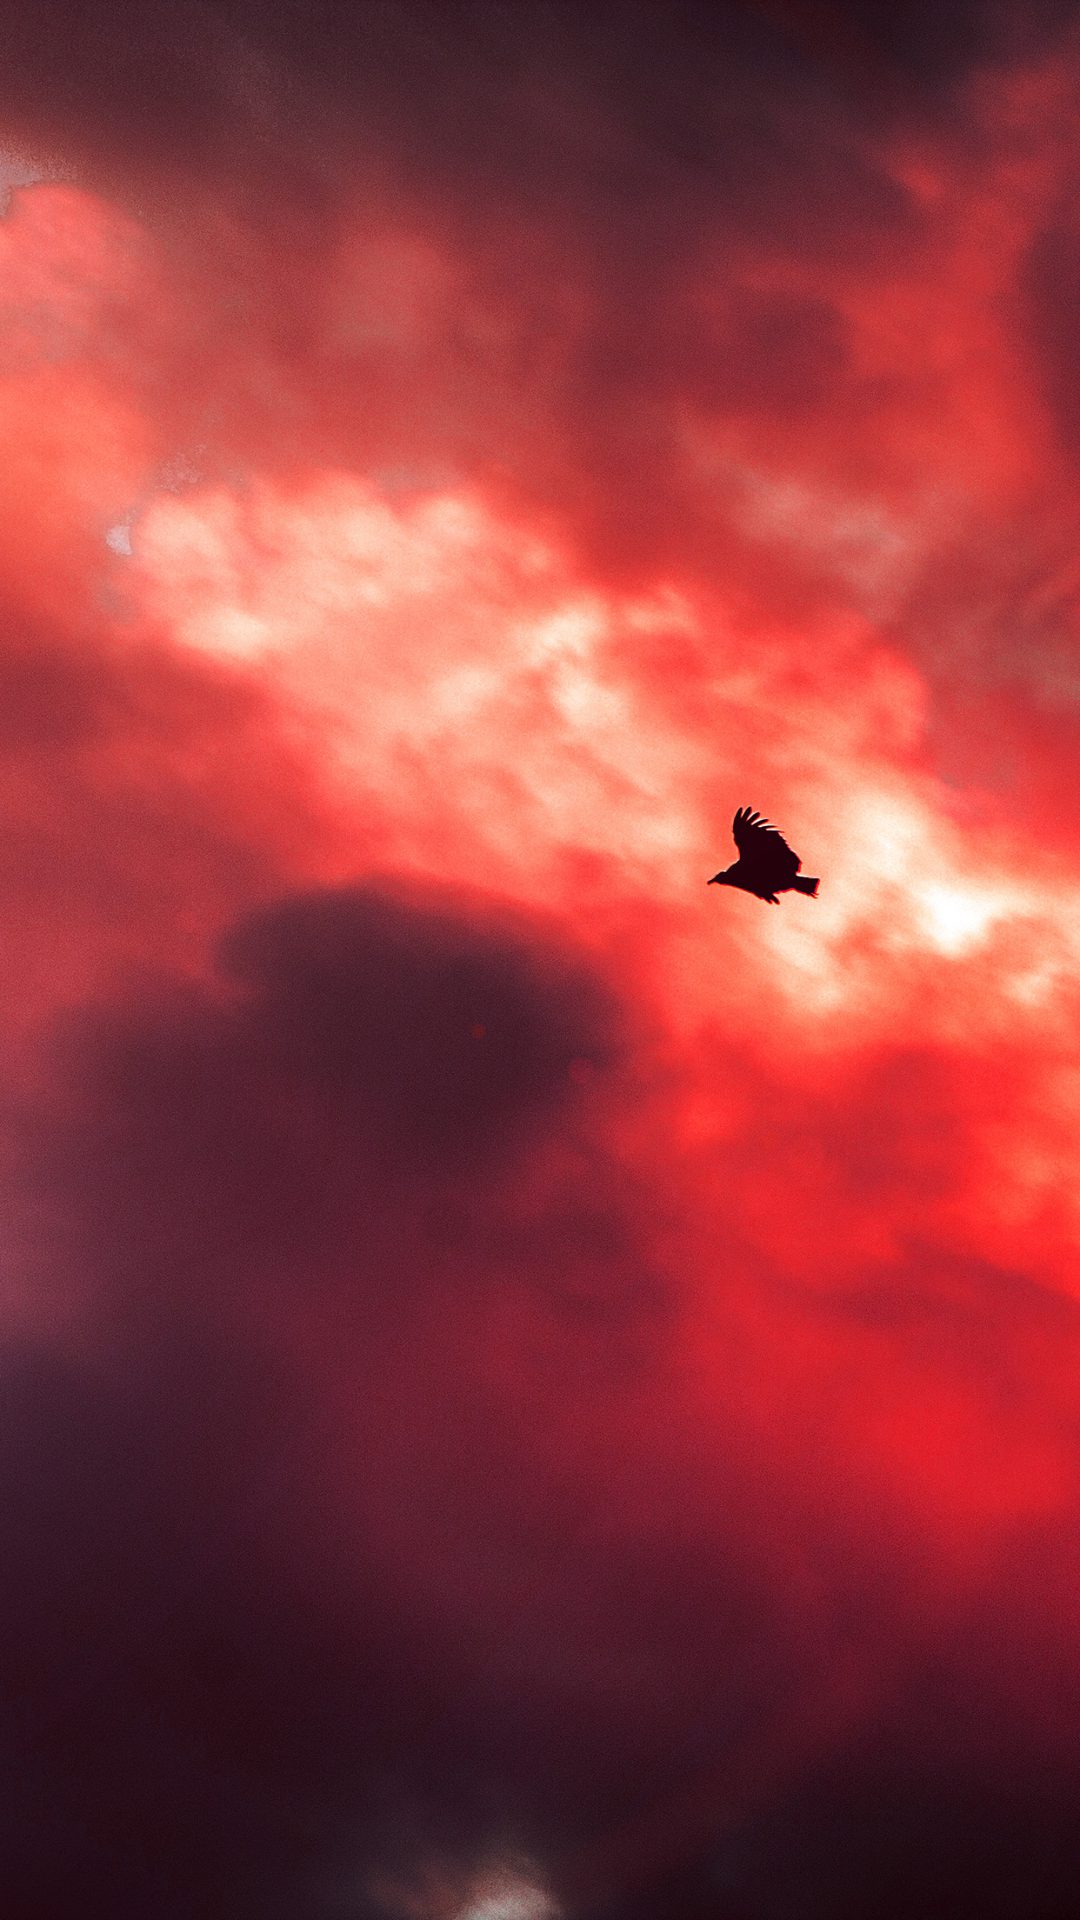 Bird Fly Sky Clouds Red Sunset Fire Nature Animal